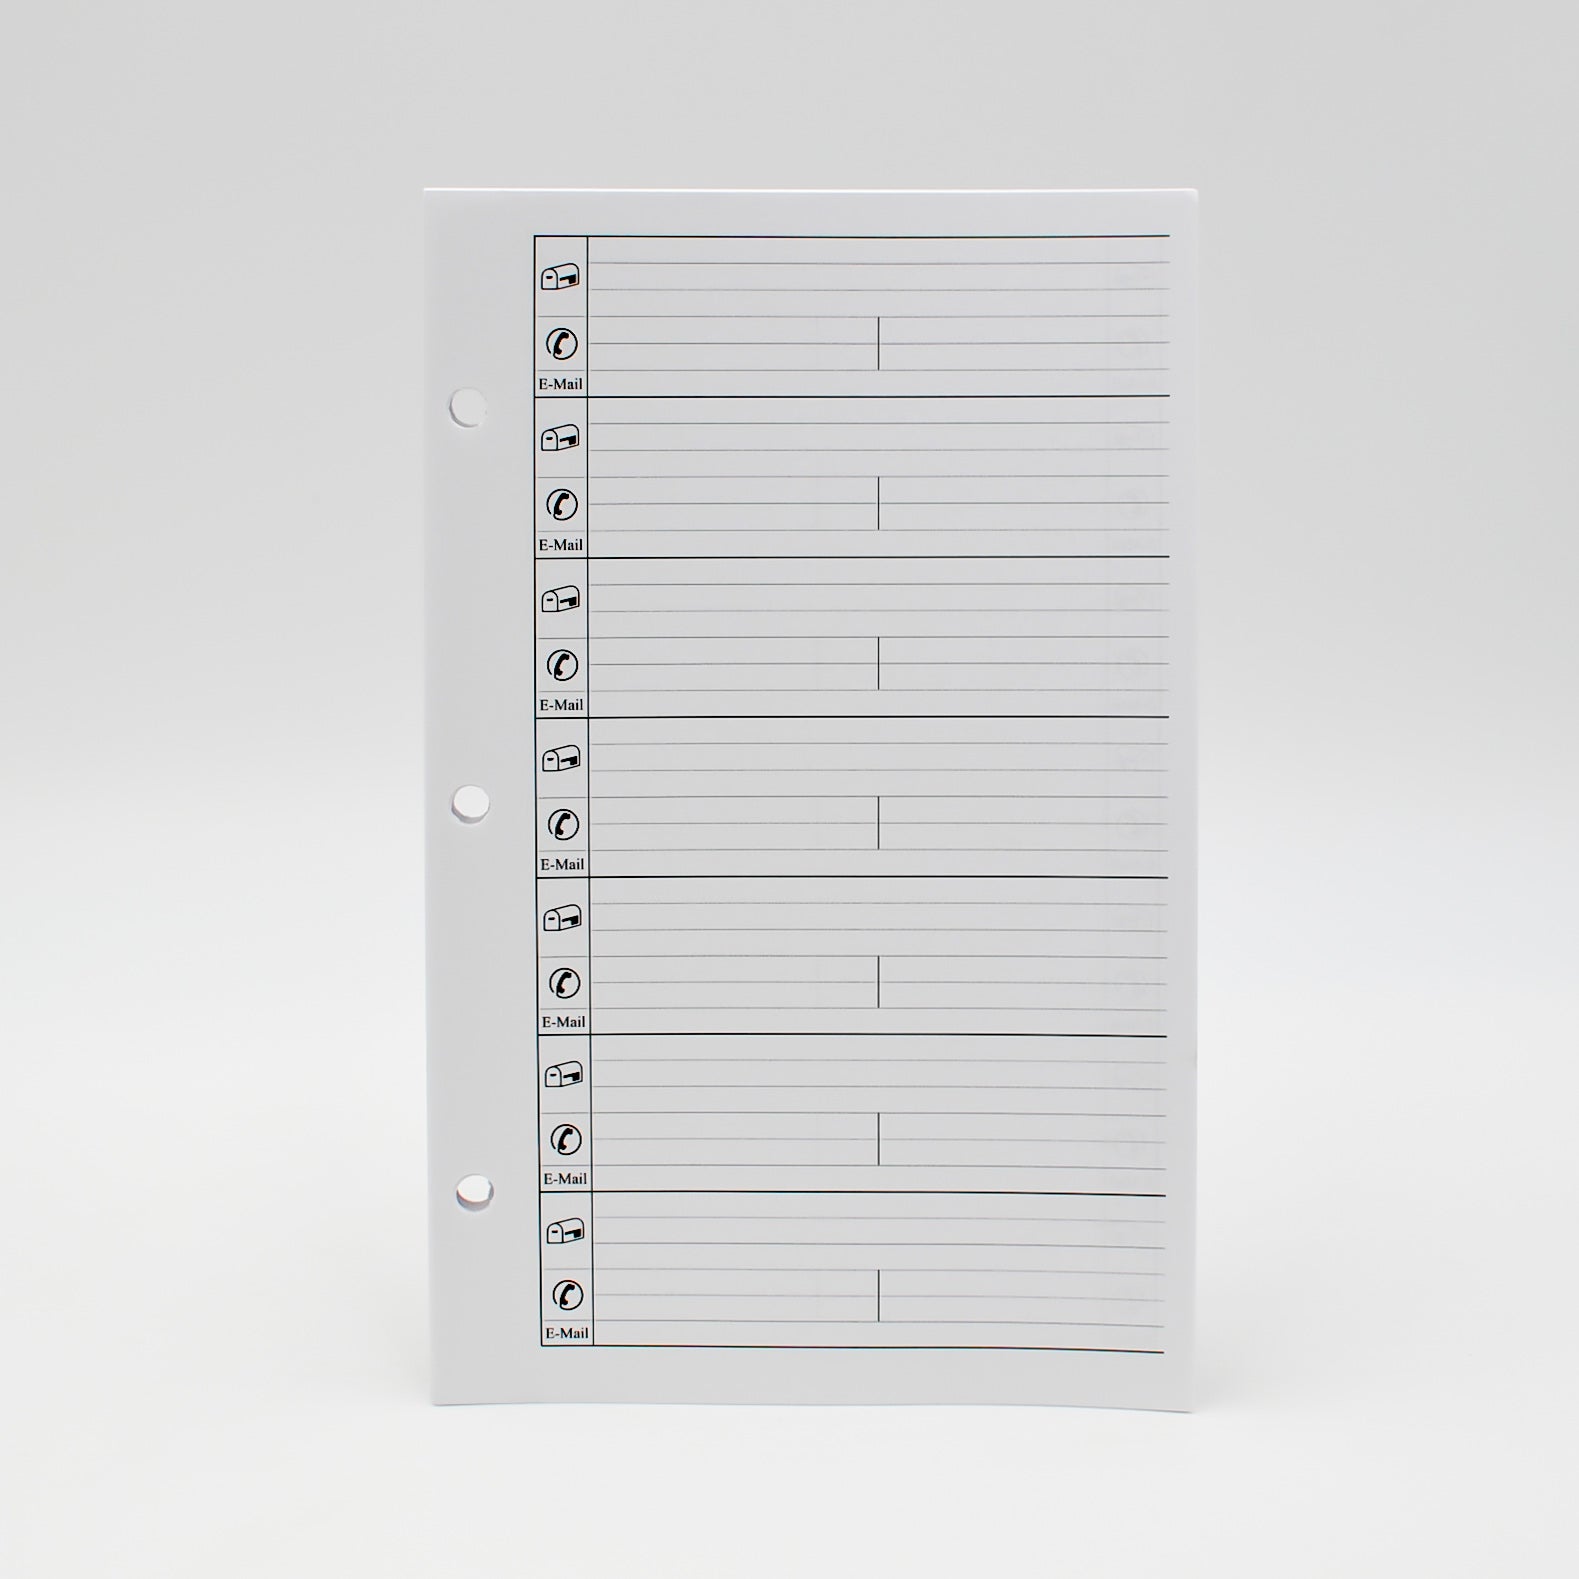 Address Sheets: MA58P3 8-1/2"X 5-1/2" 3-ringThis address / telephone book is 5-1/2" x 8-1/2" with 3 or 7 hole punch. It is available in white paper.  It is perfect for storing addresses, telephone numbers, email addresses, or even usernames and passwords.